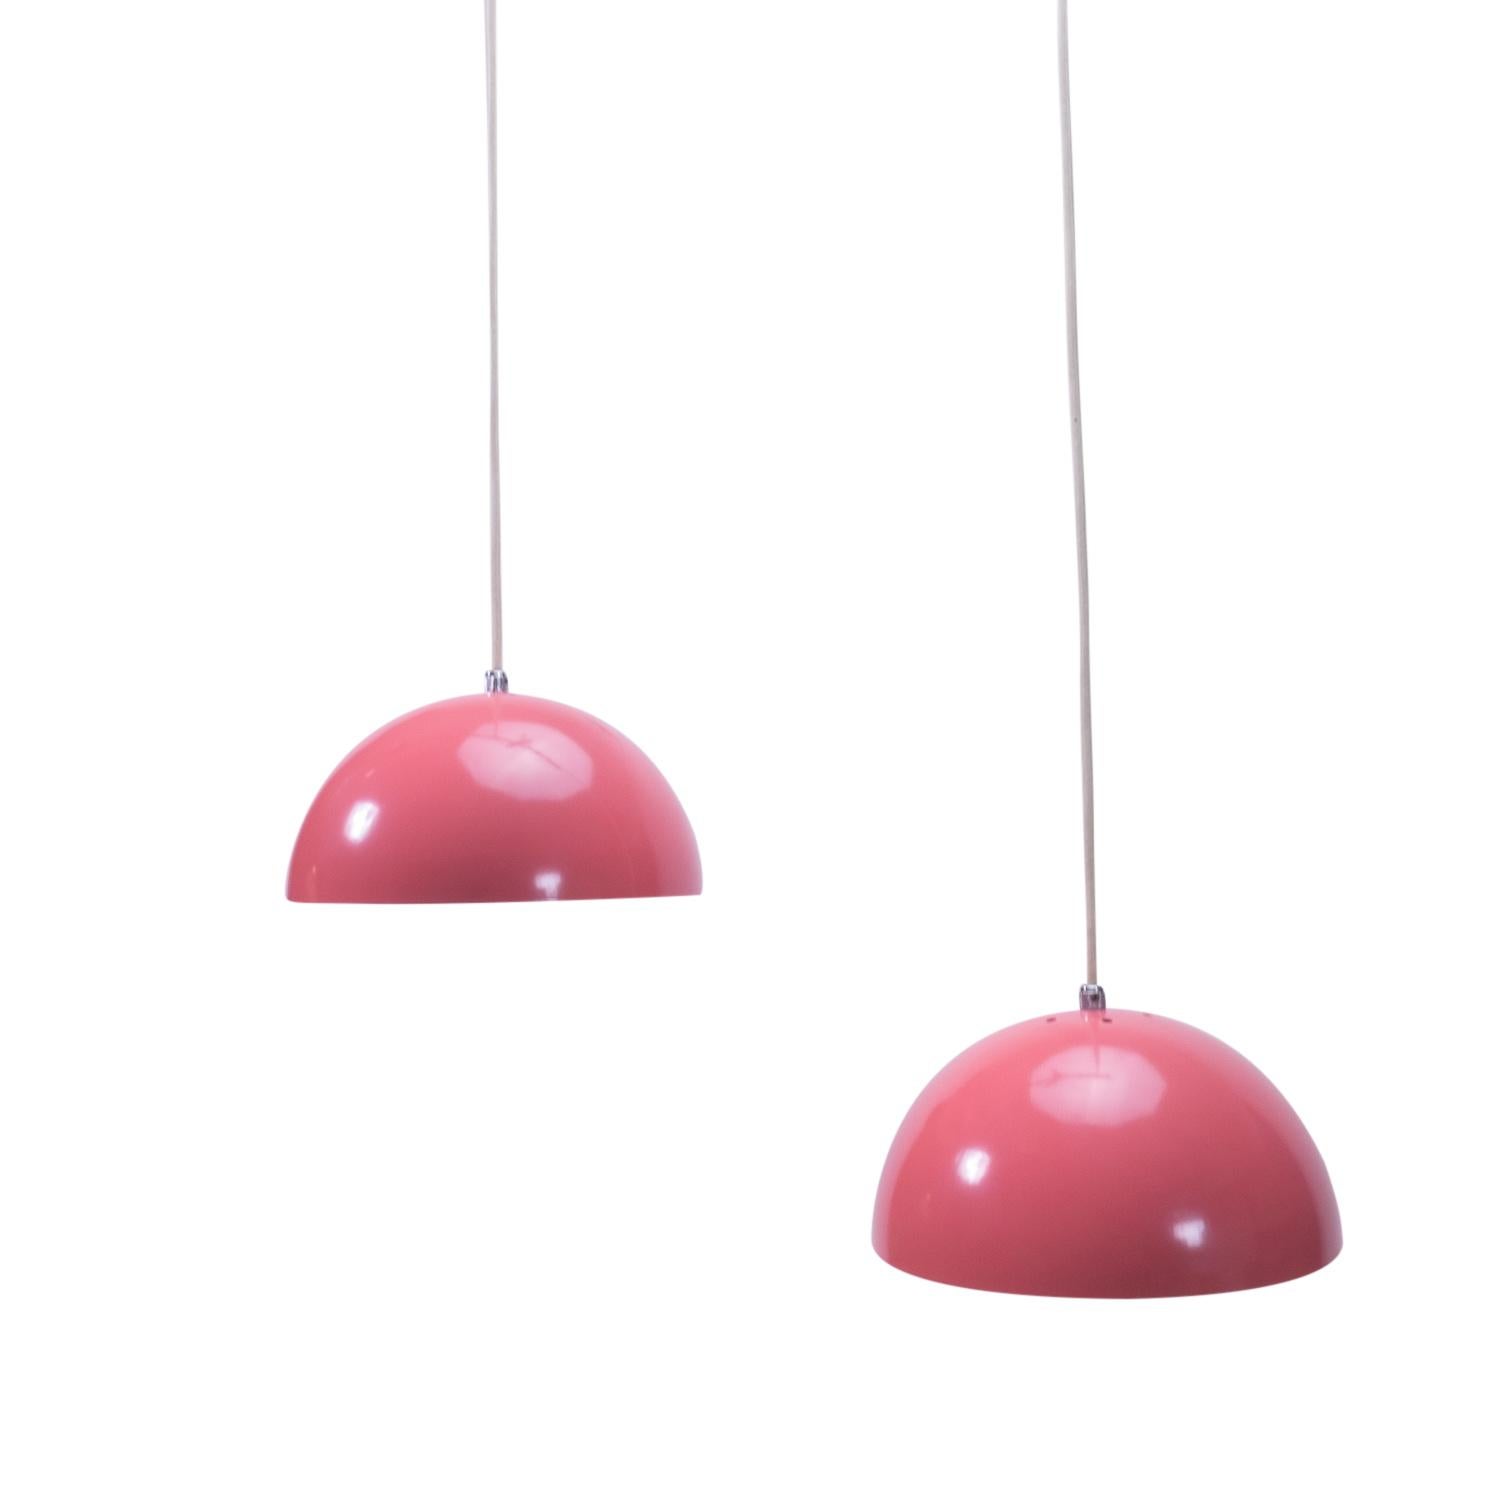 Ensemble of vintage Scandinavian ceiling lamps by Lyfa Sweden. Executed in metal, pink enamel.
 

Edison E27 screw in bulb (suitable for US)

 

Approximate dimensions:

Height: 150 cm (inc cable)
Diameter: 28 cm

 

Condition: Good.